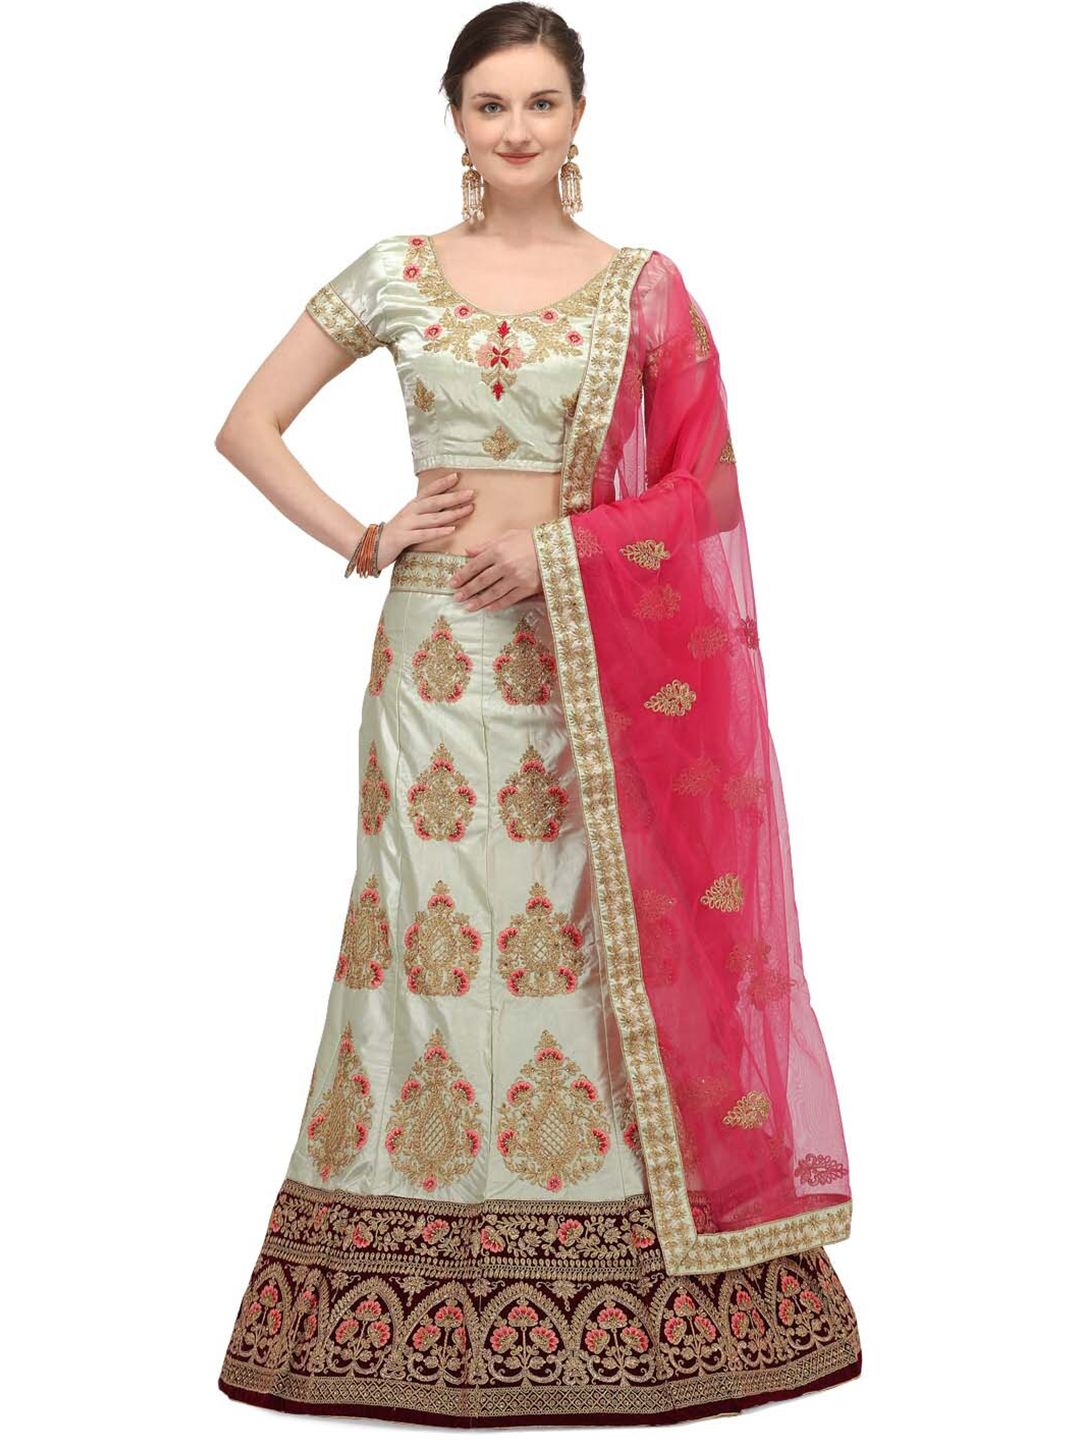 Netram Lime Green & Pink Embroidered Beads and Stones Semi-Stitched Lehenga & Unstitched Blouse With Dupatta Price in India